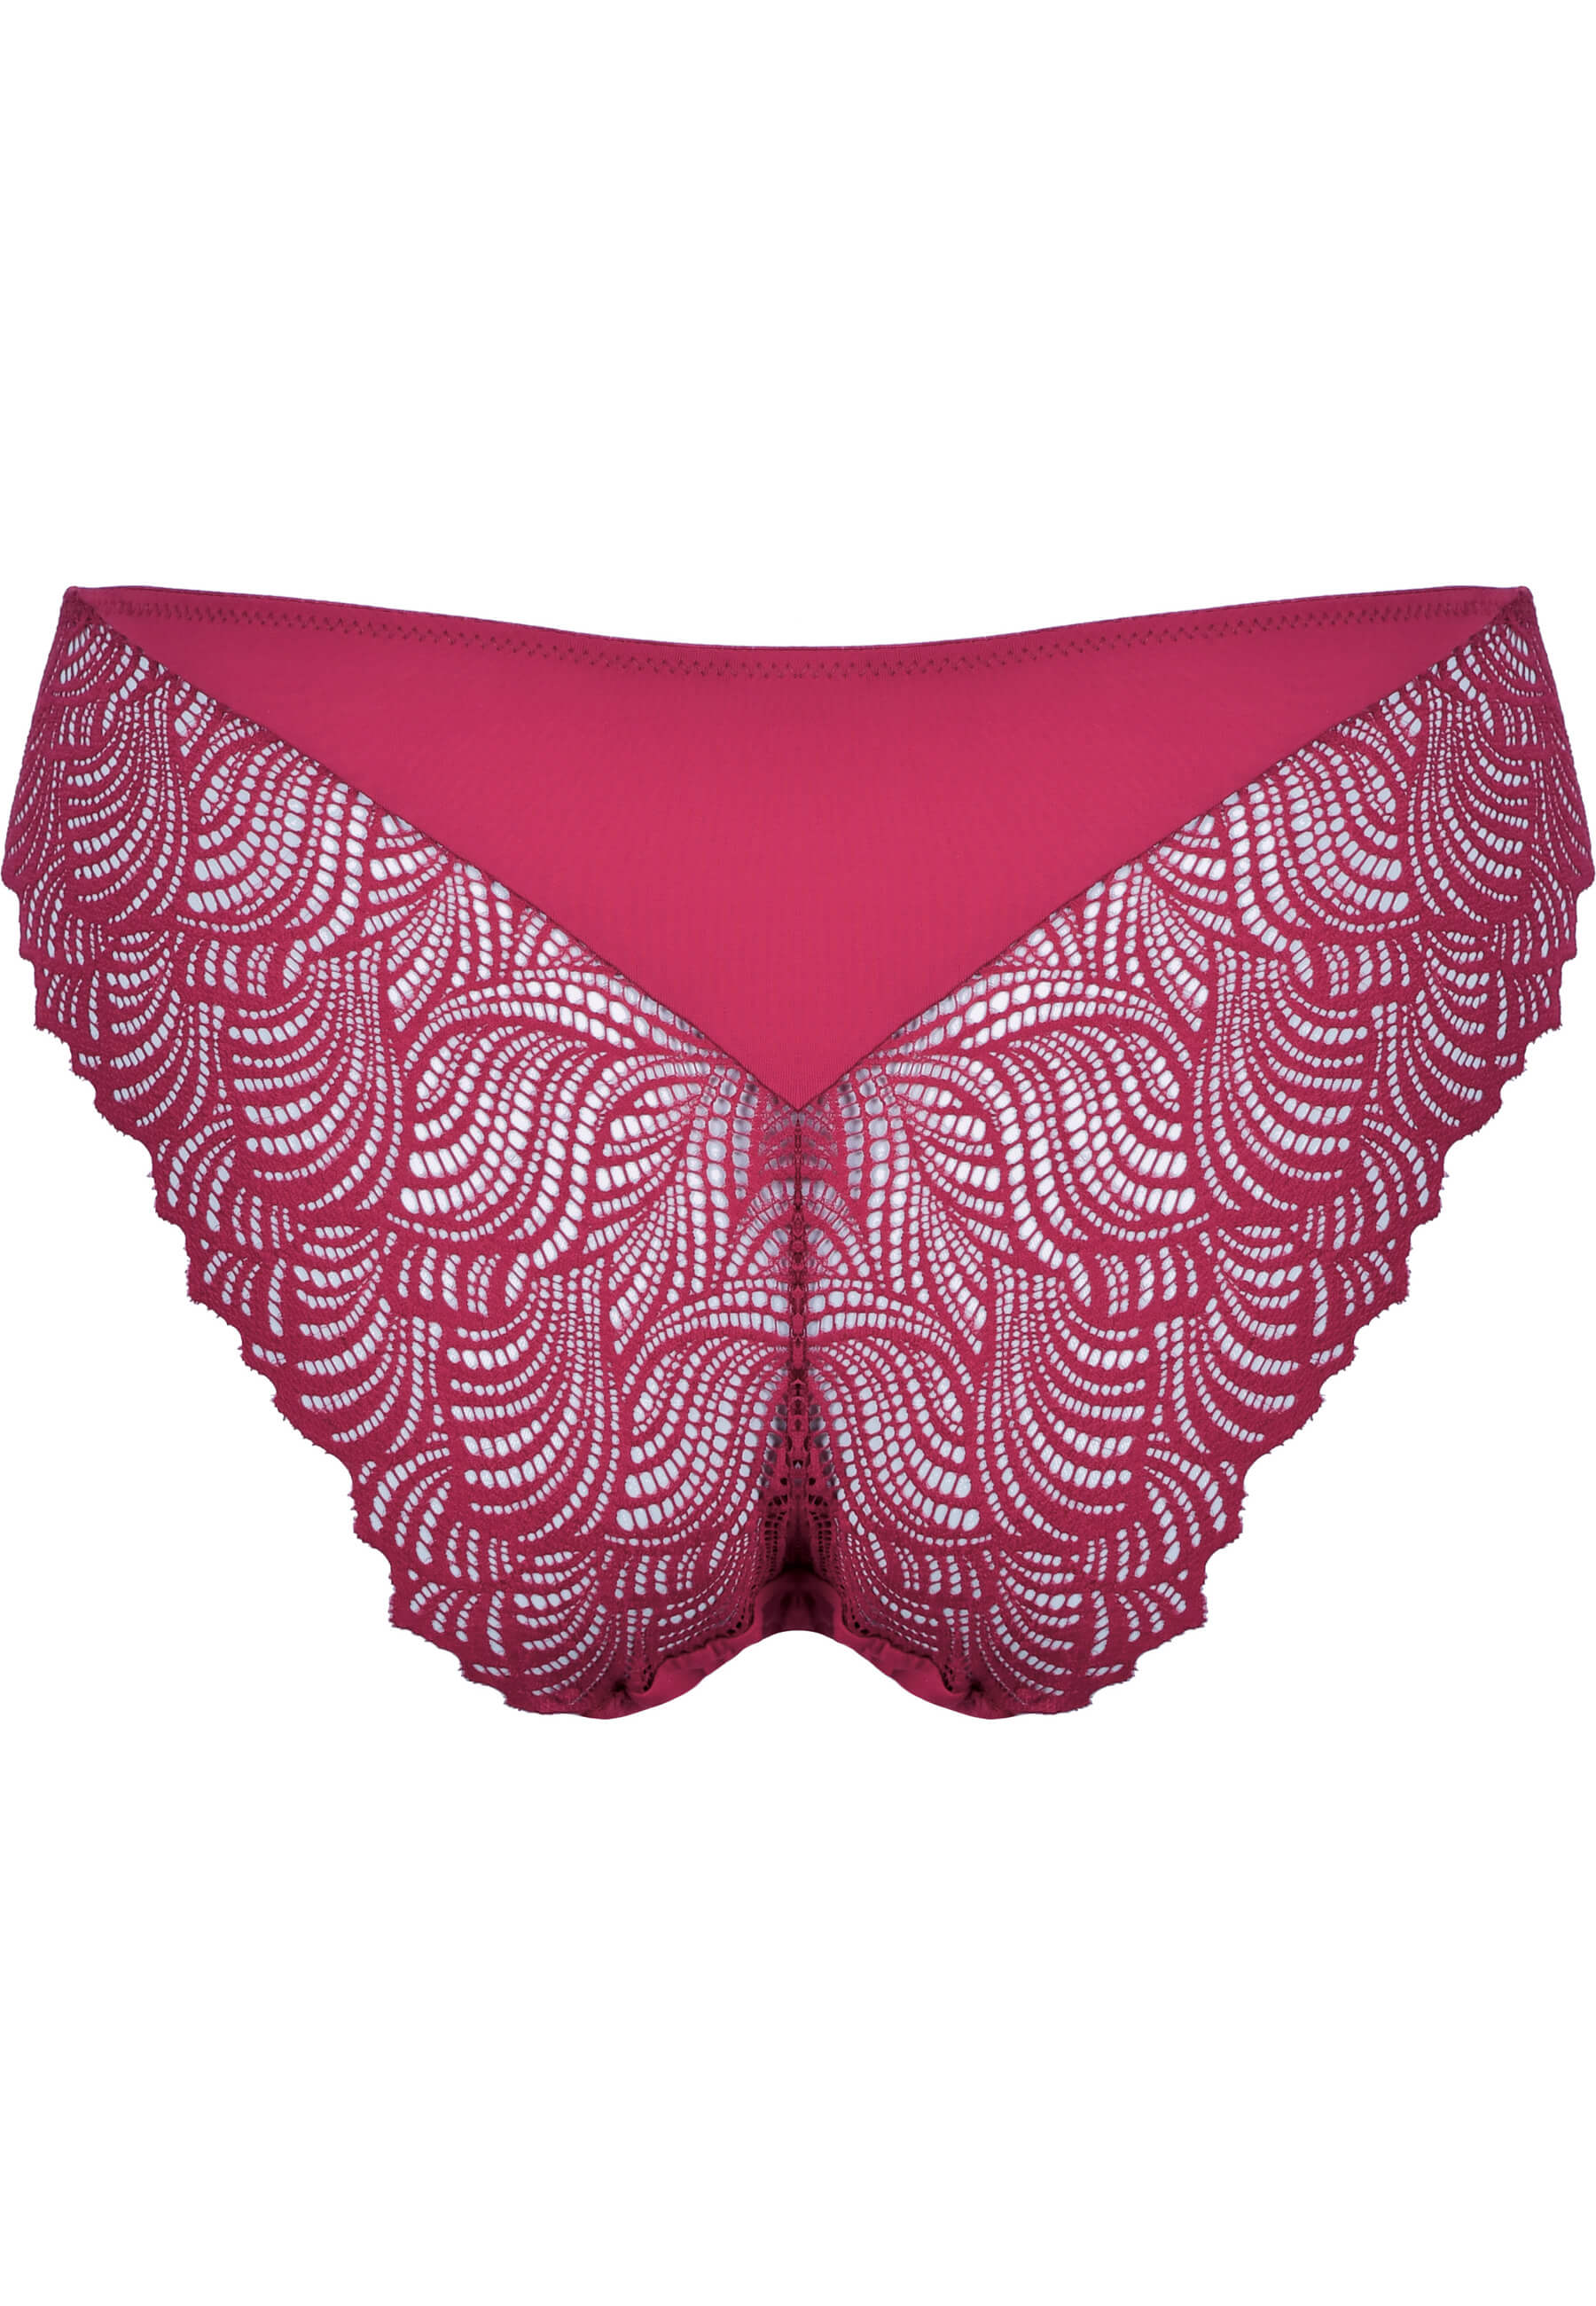 Panty with Lace Detail - Cassis